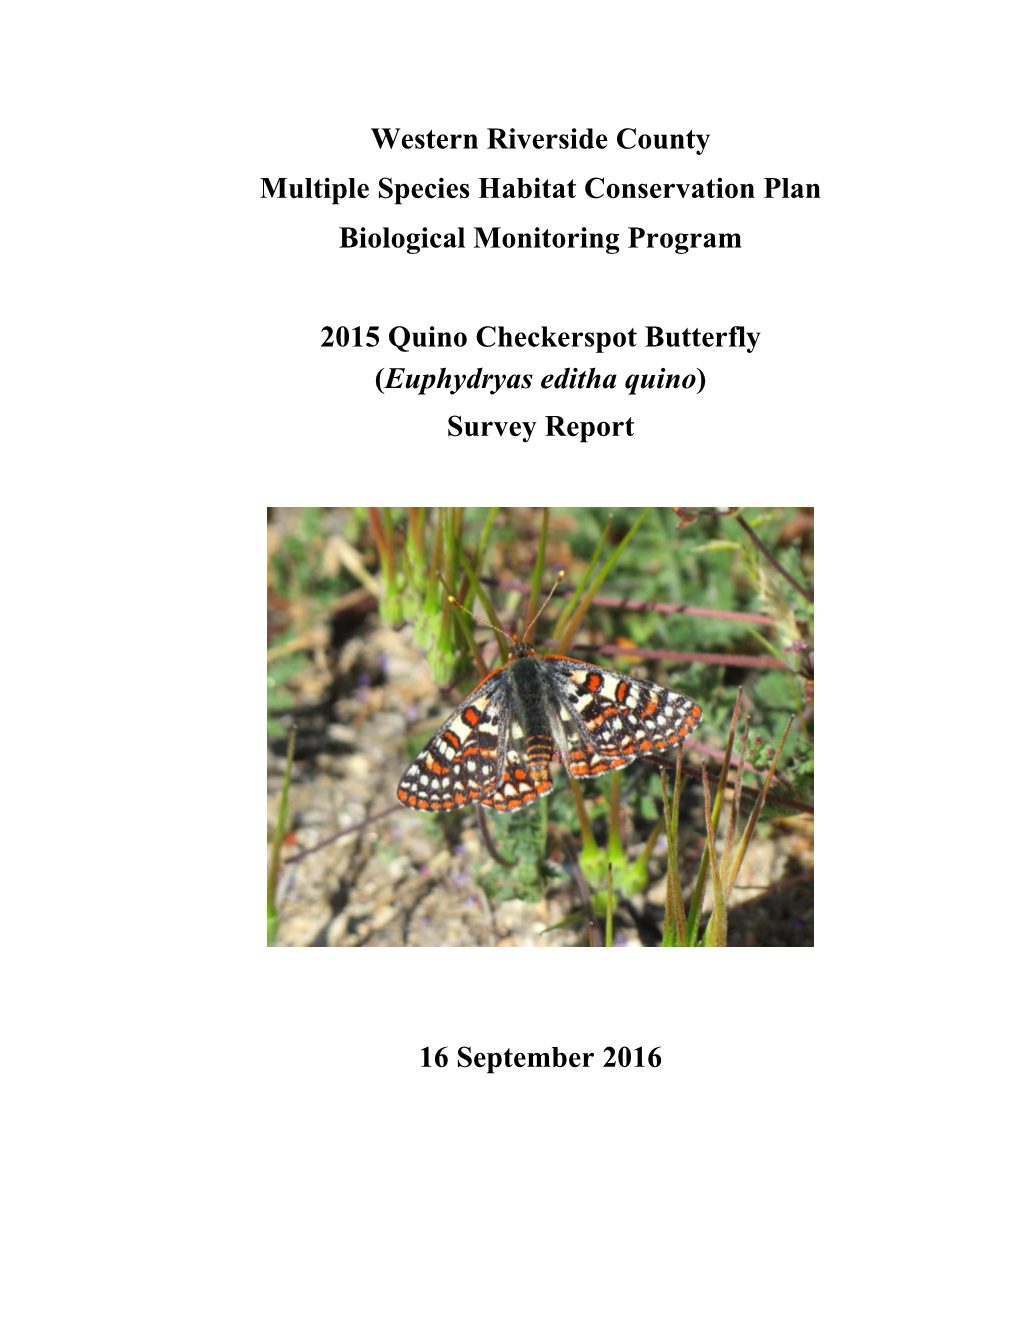 Quino Checkerspot Butterfly Survey Report 2015